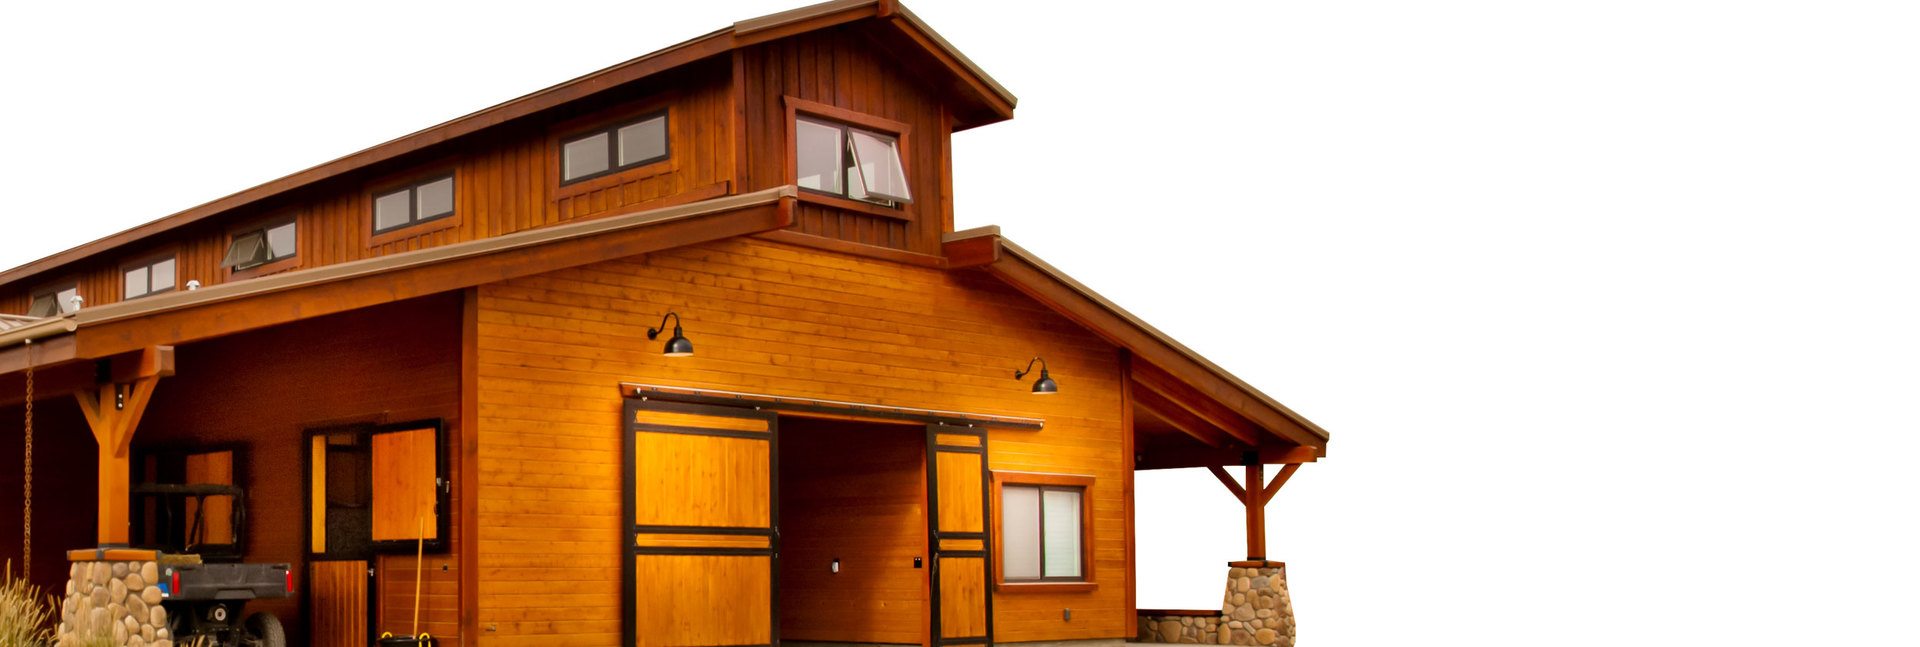 DC Builders is a general contracting and design firm specializing in custom horse barns and barn homes.